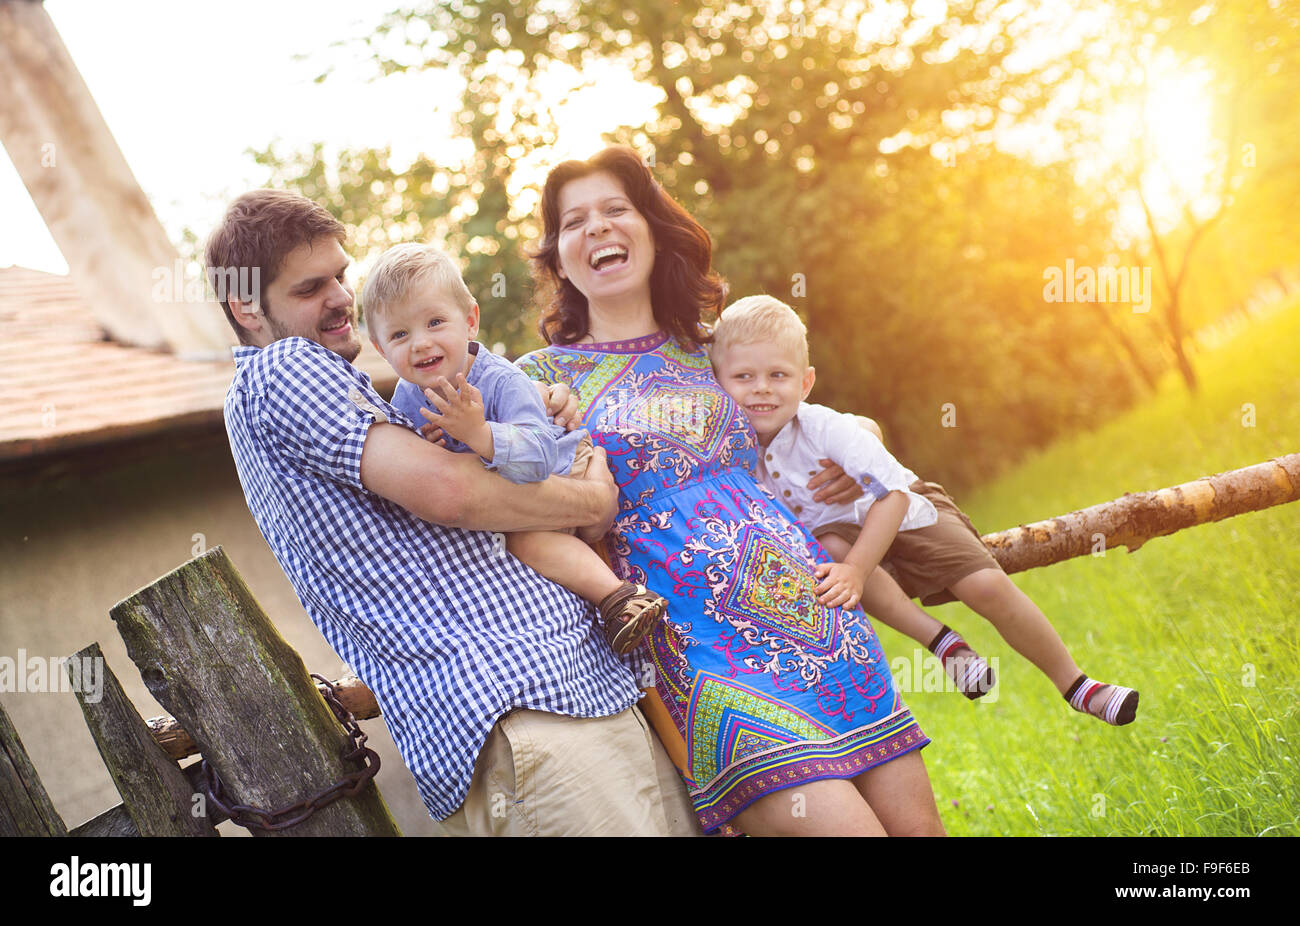 Happy young family spending time together and having fun in front of an old countryside house. Stock Photo